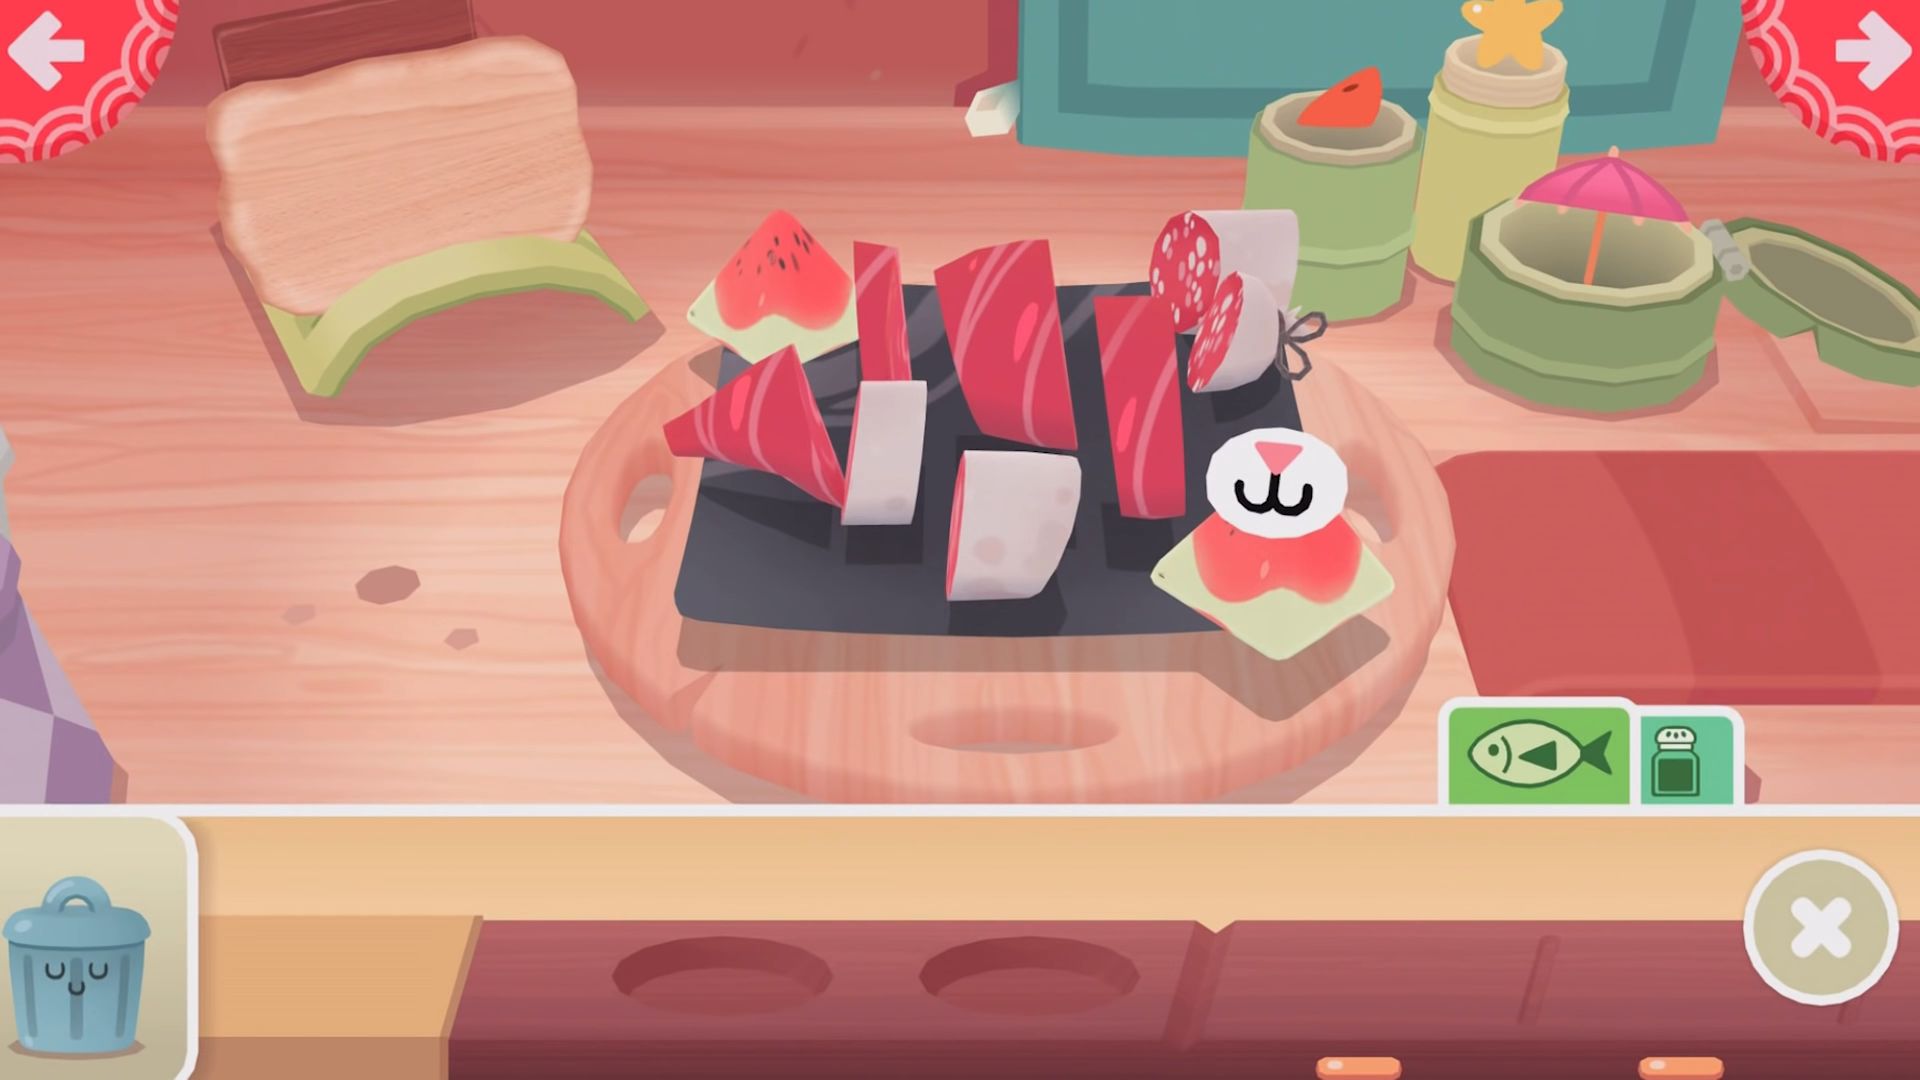 Toca Kitchen Sushi Restaurant for Android